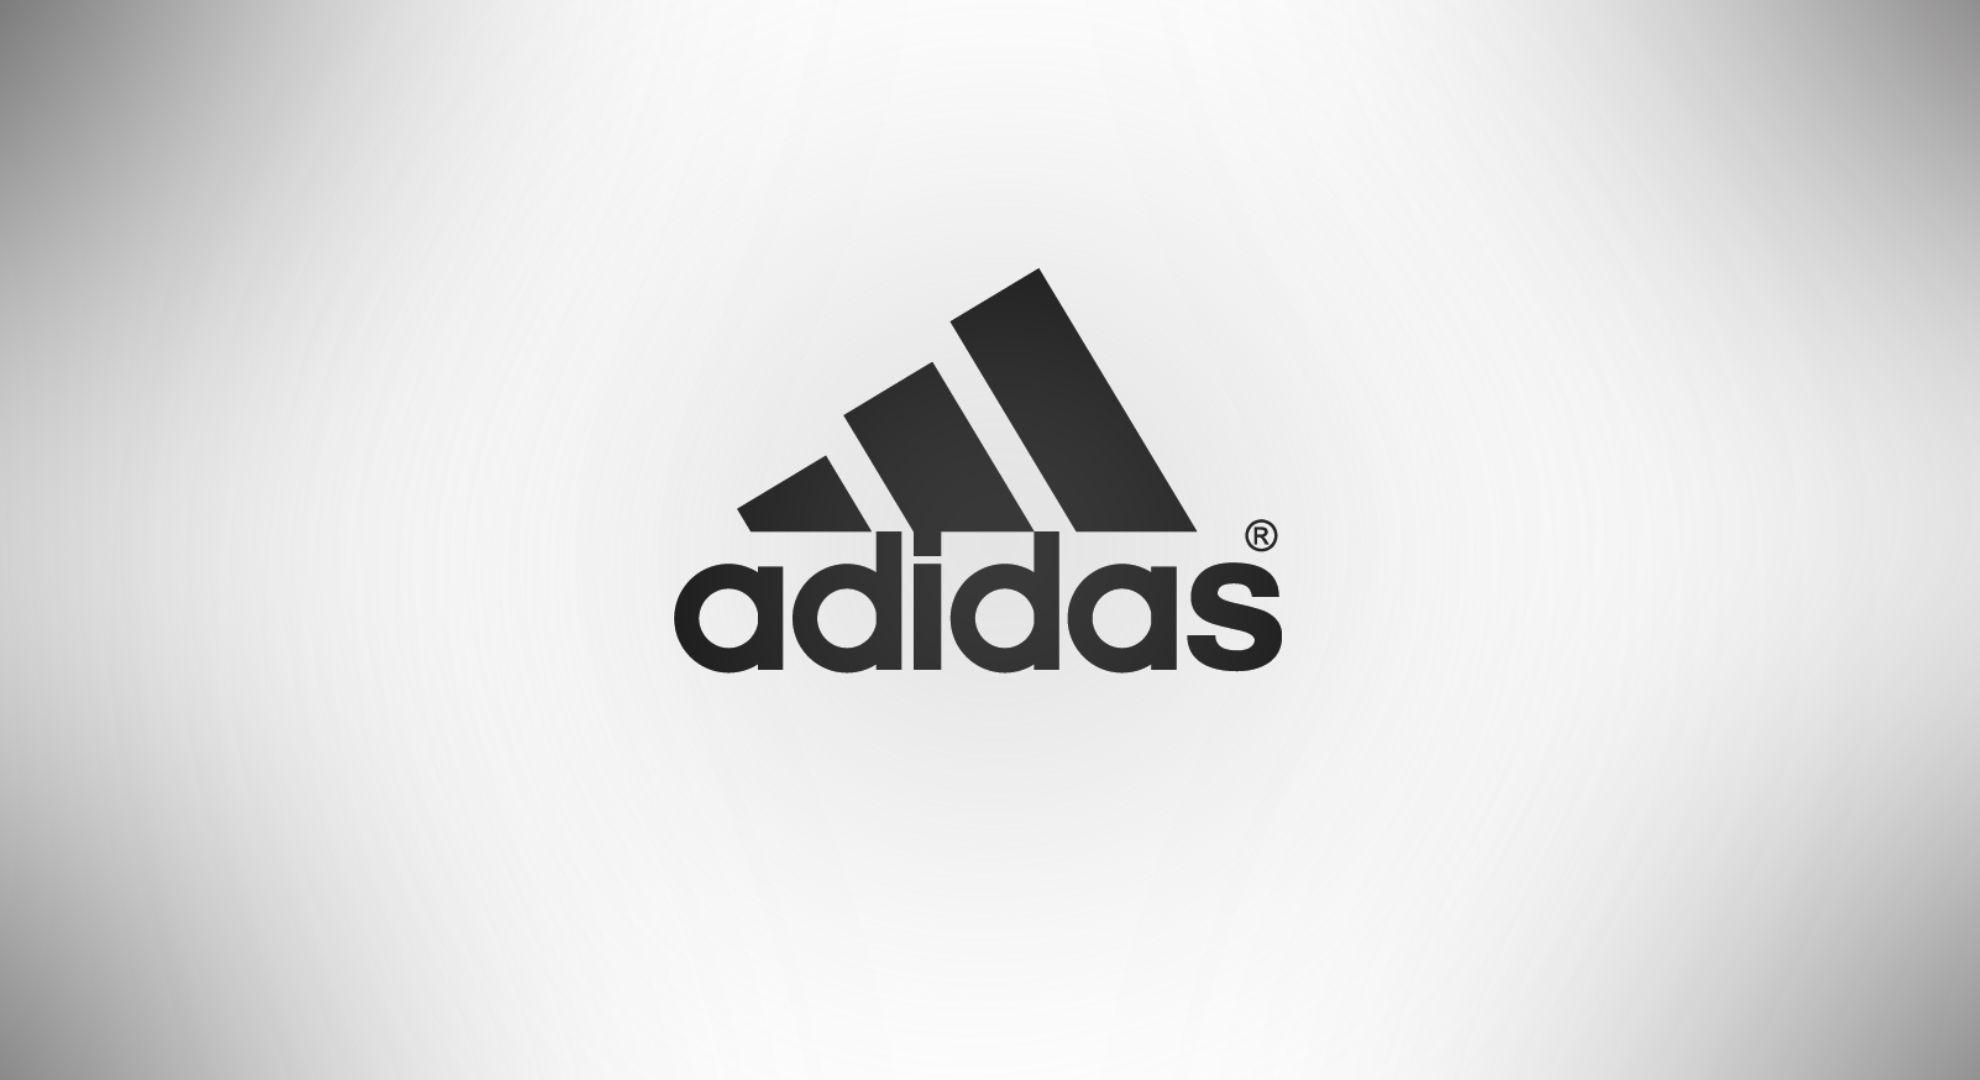 Awesome Adidas Image Collection: Adidas Wallpaper for mobile